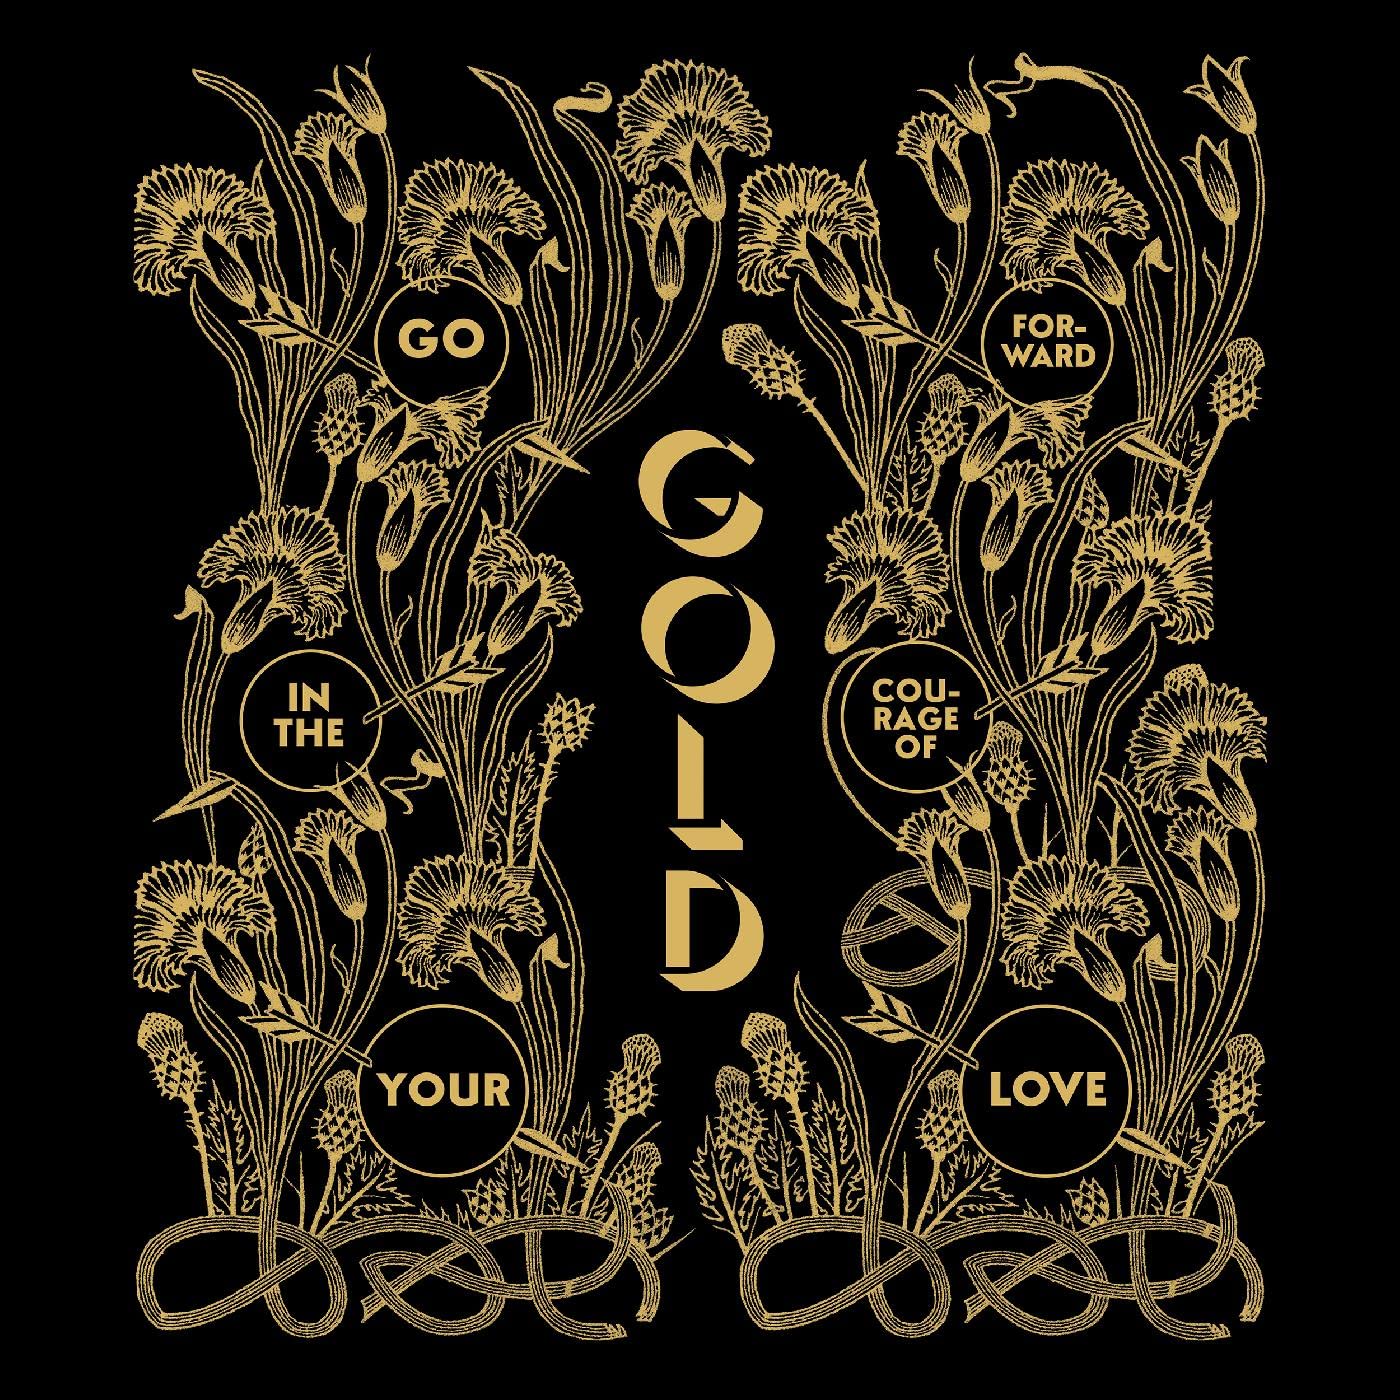 Виниловая пластинка DePlume, Alabaster, Gold - Go Forward In The Courage Of Your Love (0789993991617) alabaster deplume gold go forward in the courage of your love coloured 2lp 2022 eye of the sun gatefold limited виниловая пластинка